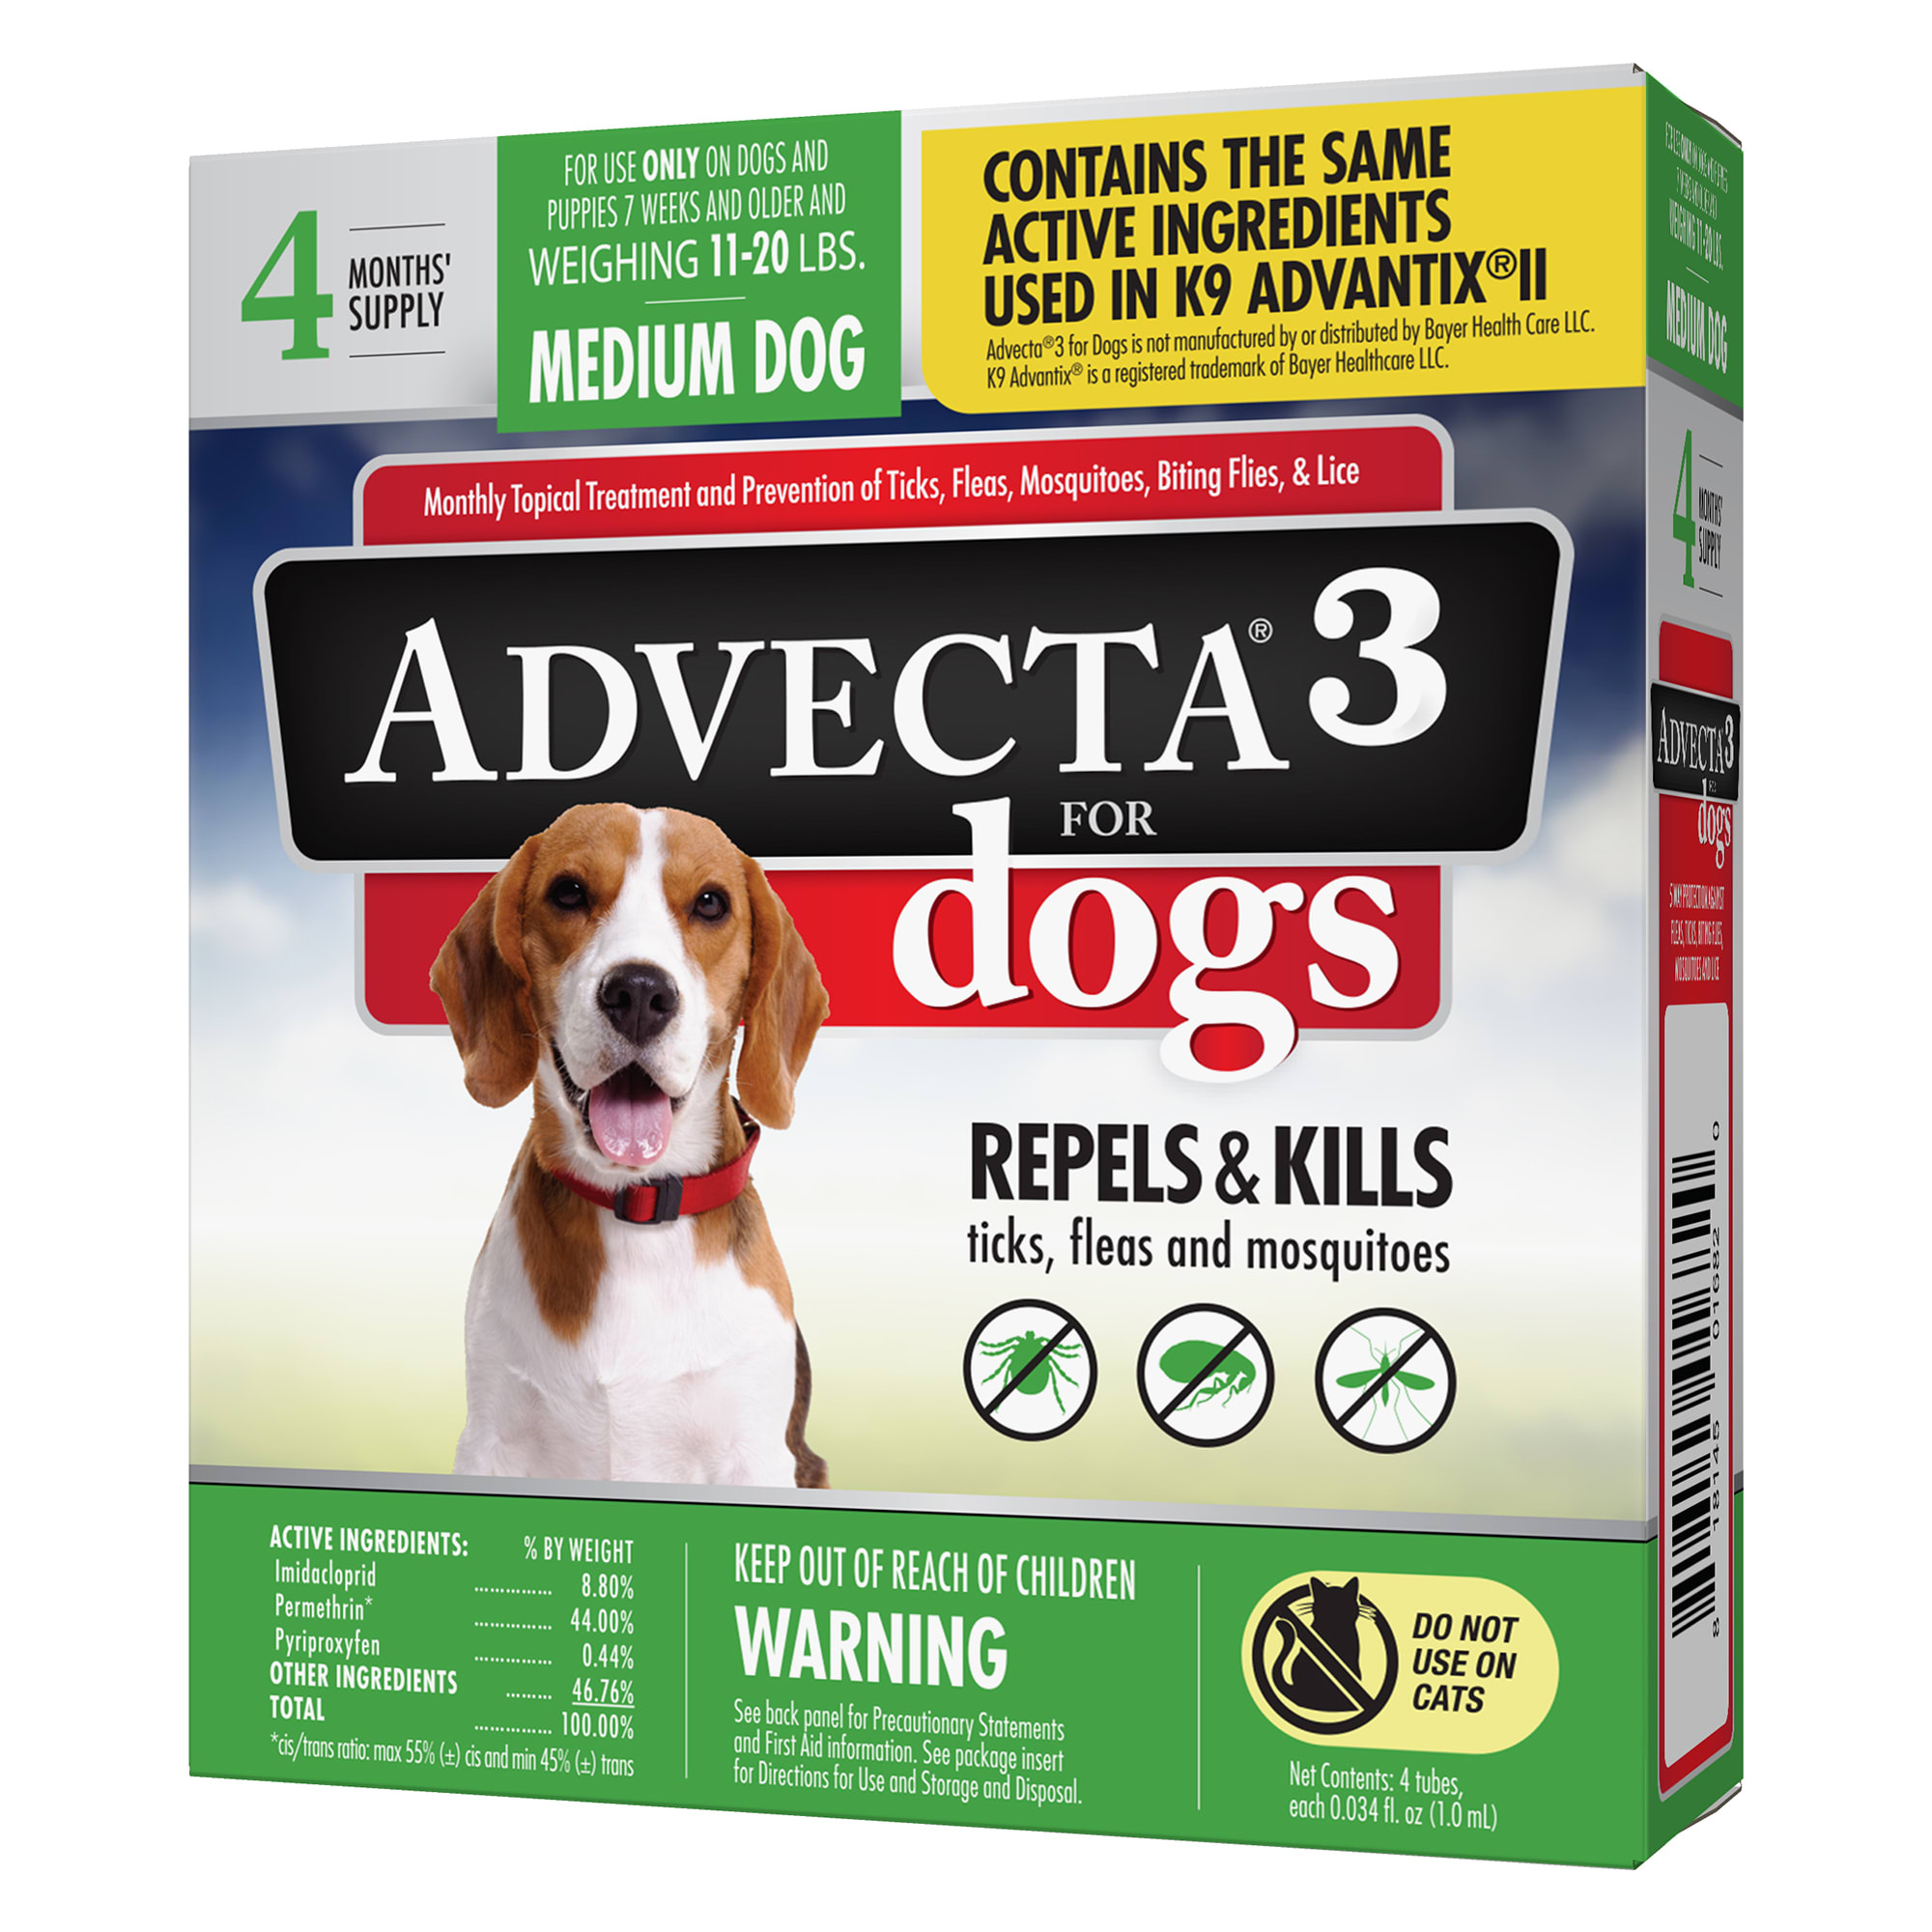 Advecta Ultra Flea and Tick Prevention for Dogs  Dog Flea and Tick Treatment  Waterproof Topical  Fast Acting  Large Dogs (21-55 lbs)  Doses